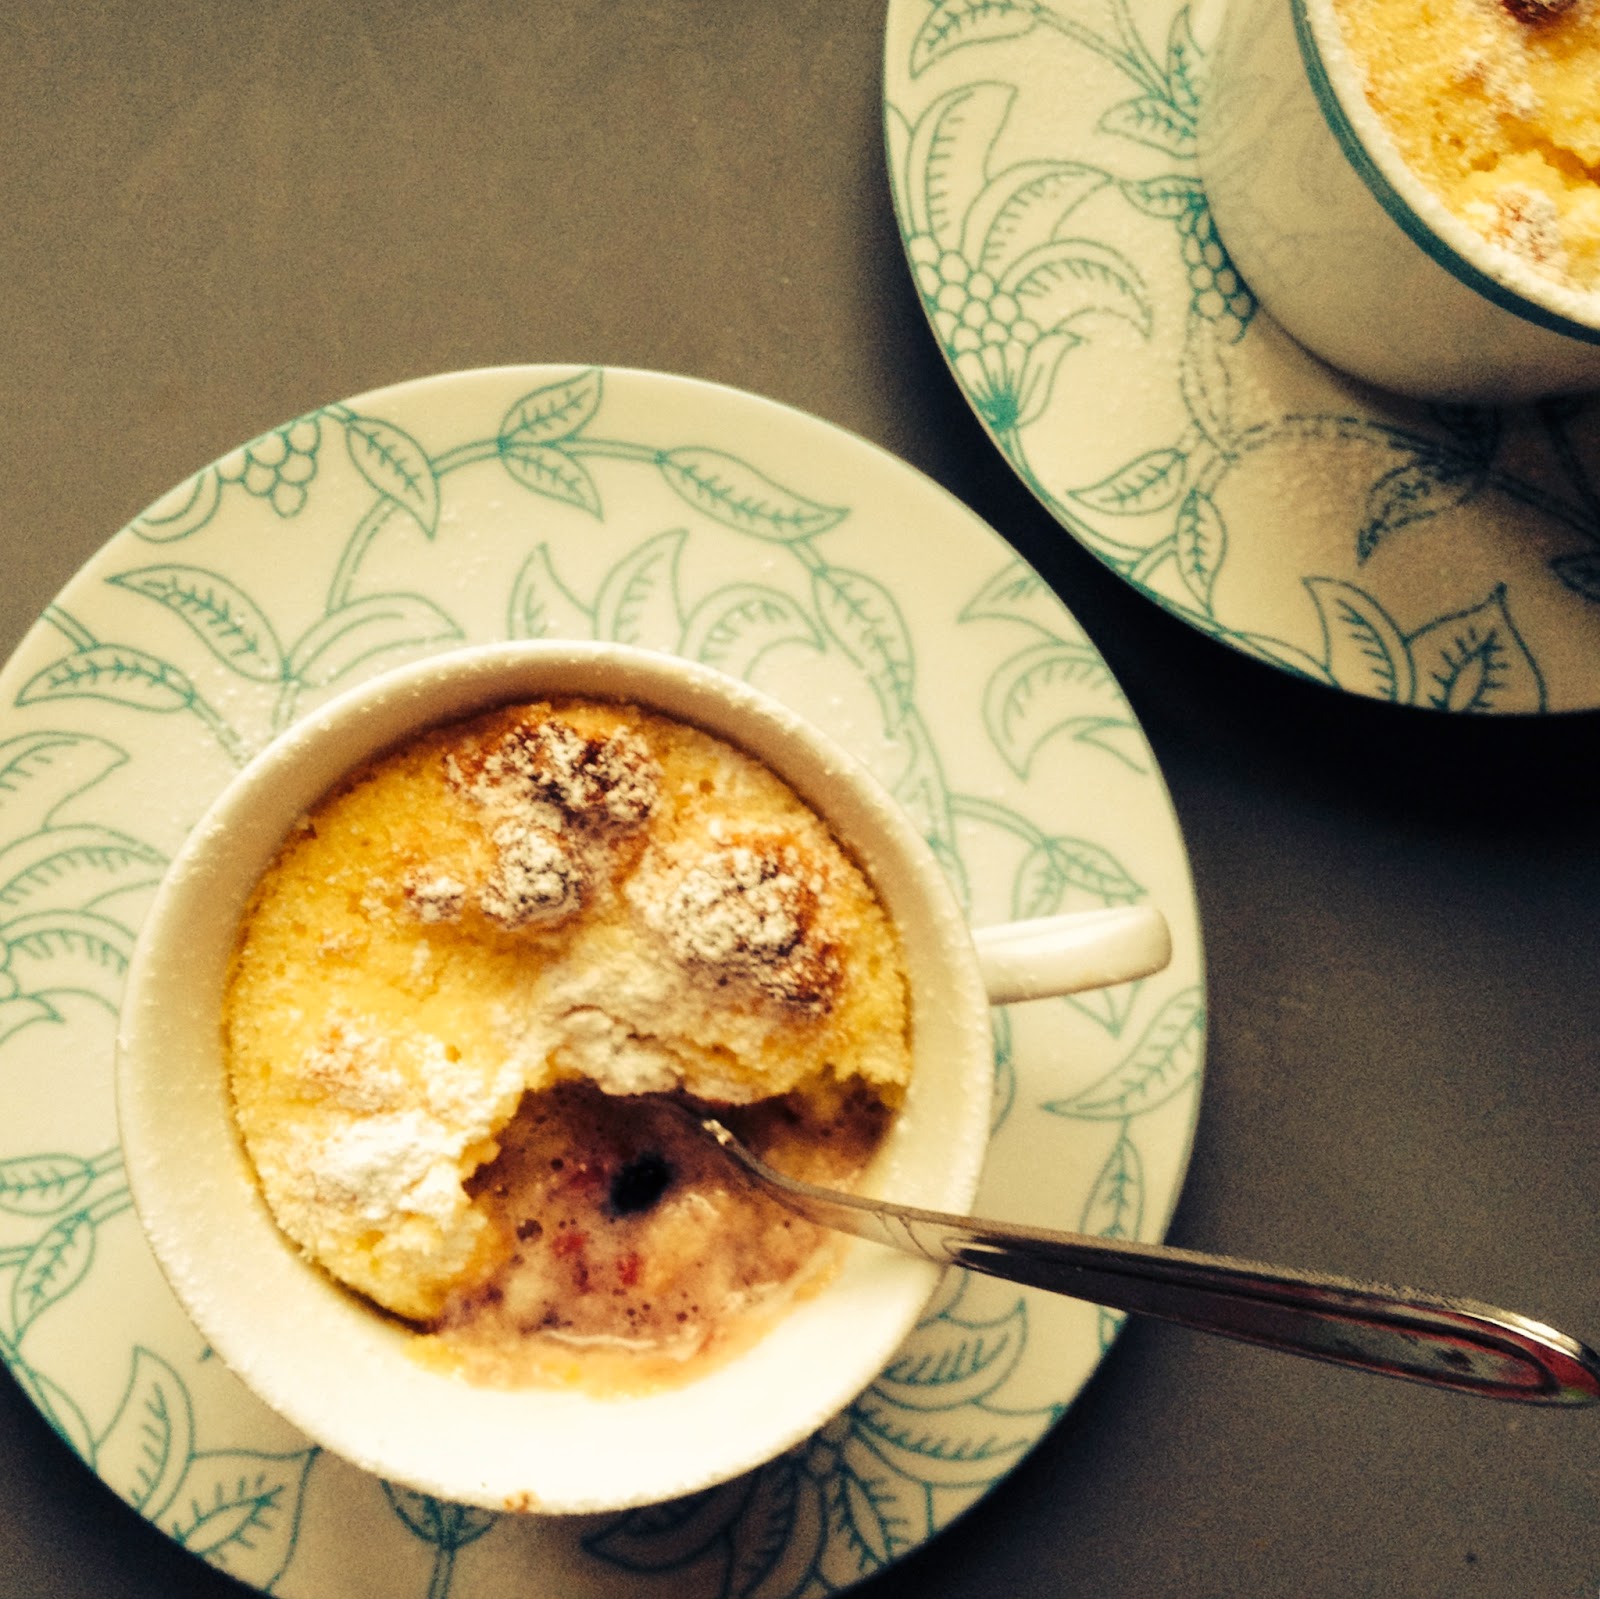 Gluten-Free Blueberry Orange Delicious Pudding Photo Credit: Lucy Corry